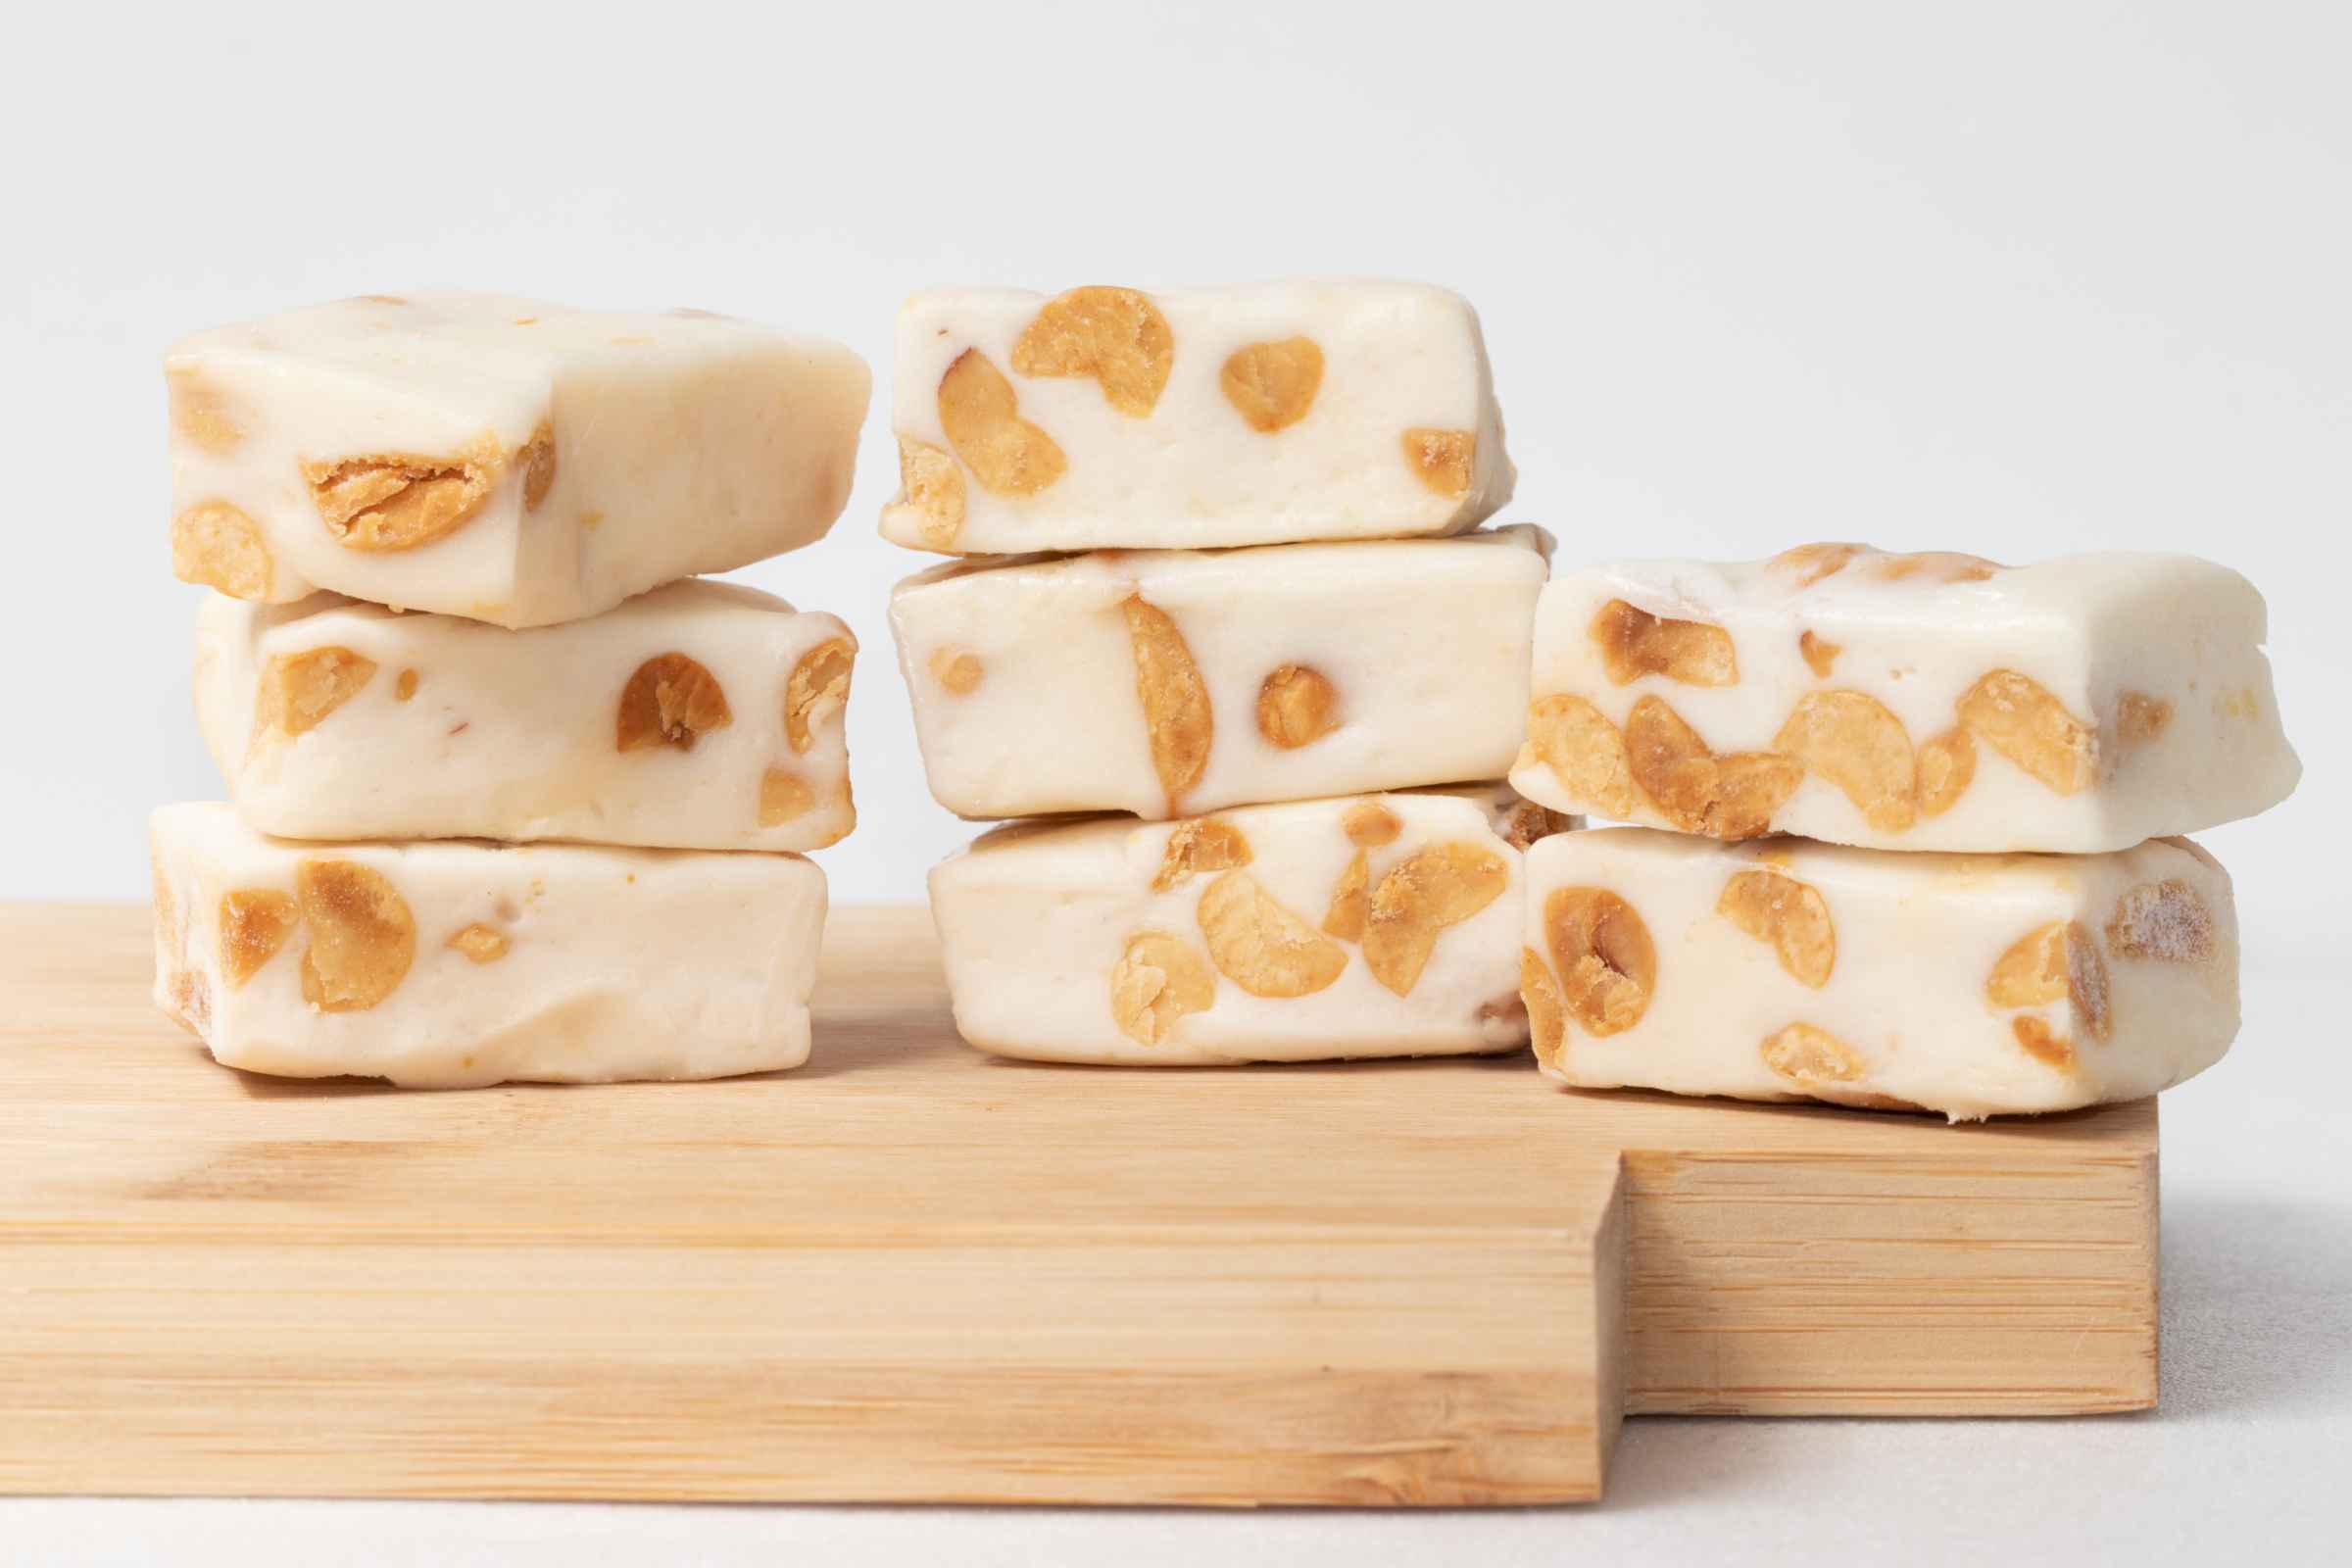 A pile of nougat squares on a wooden board